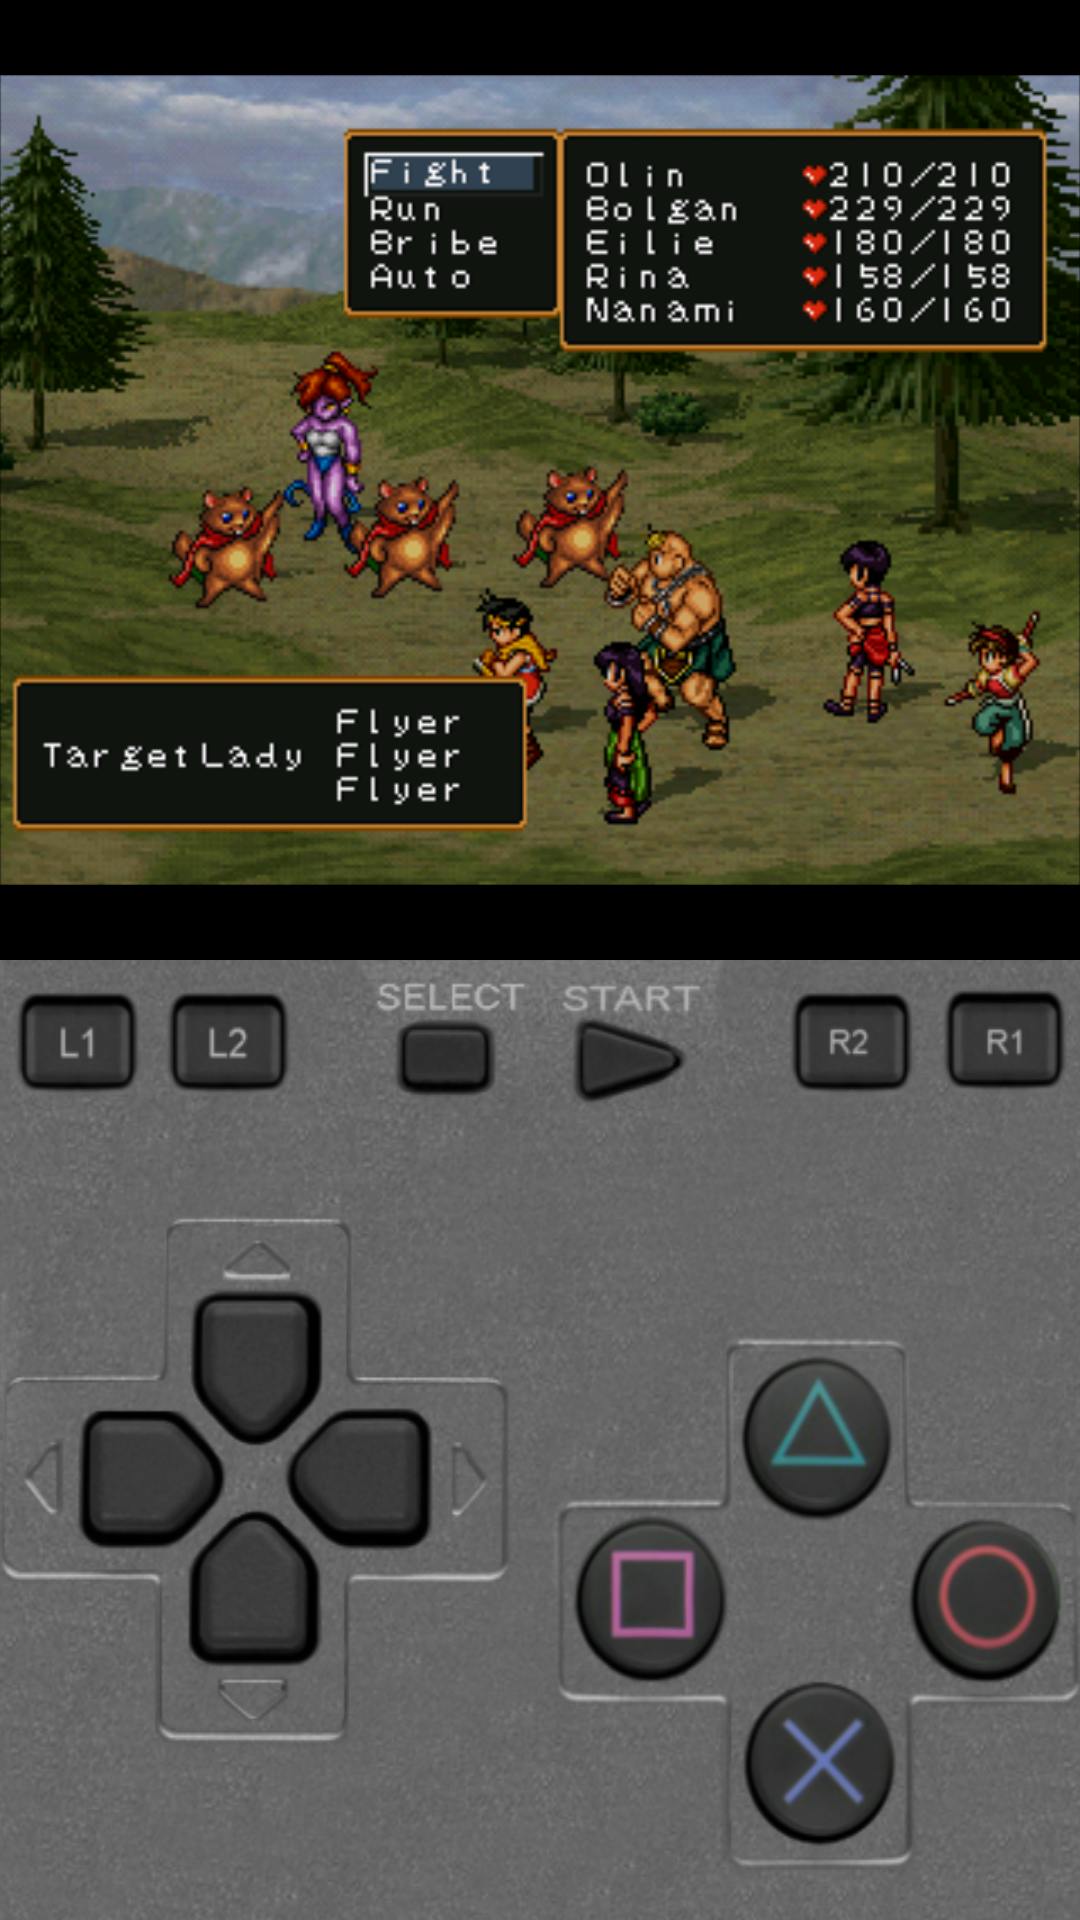 "Suikoden II" emulated by ePSXe